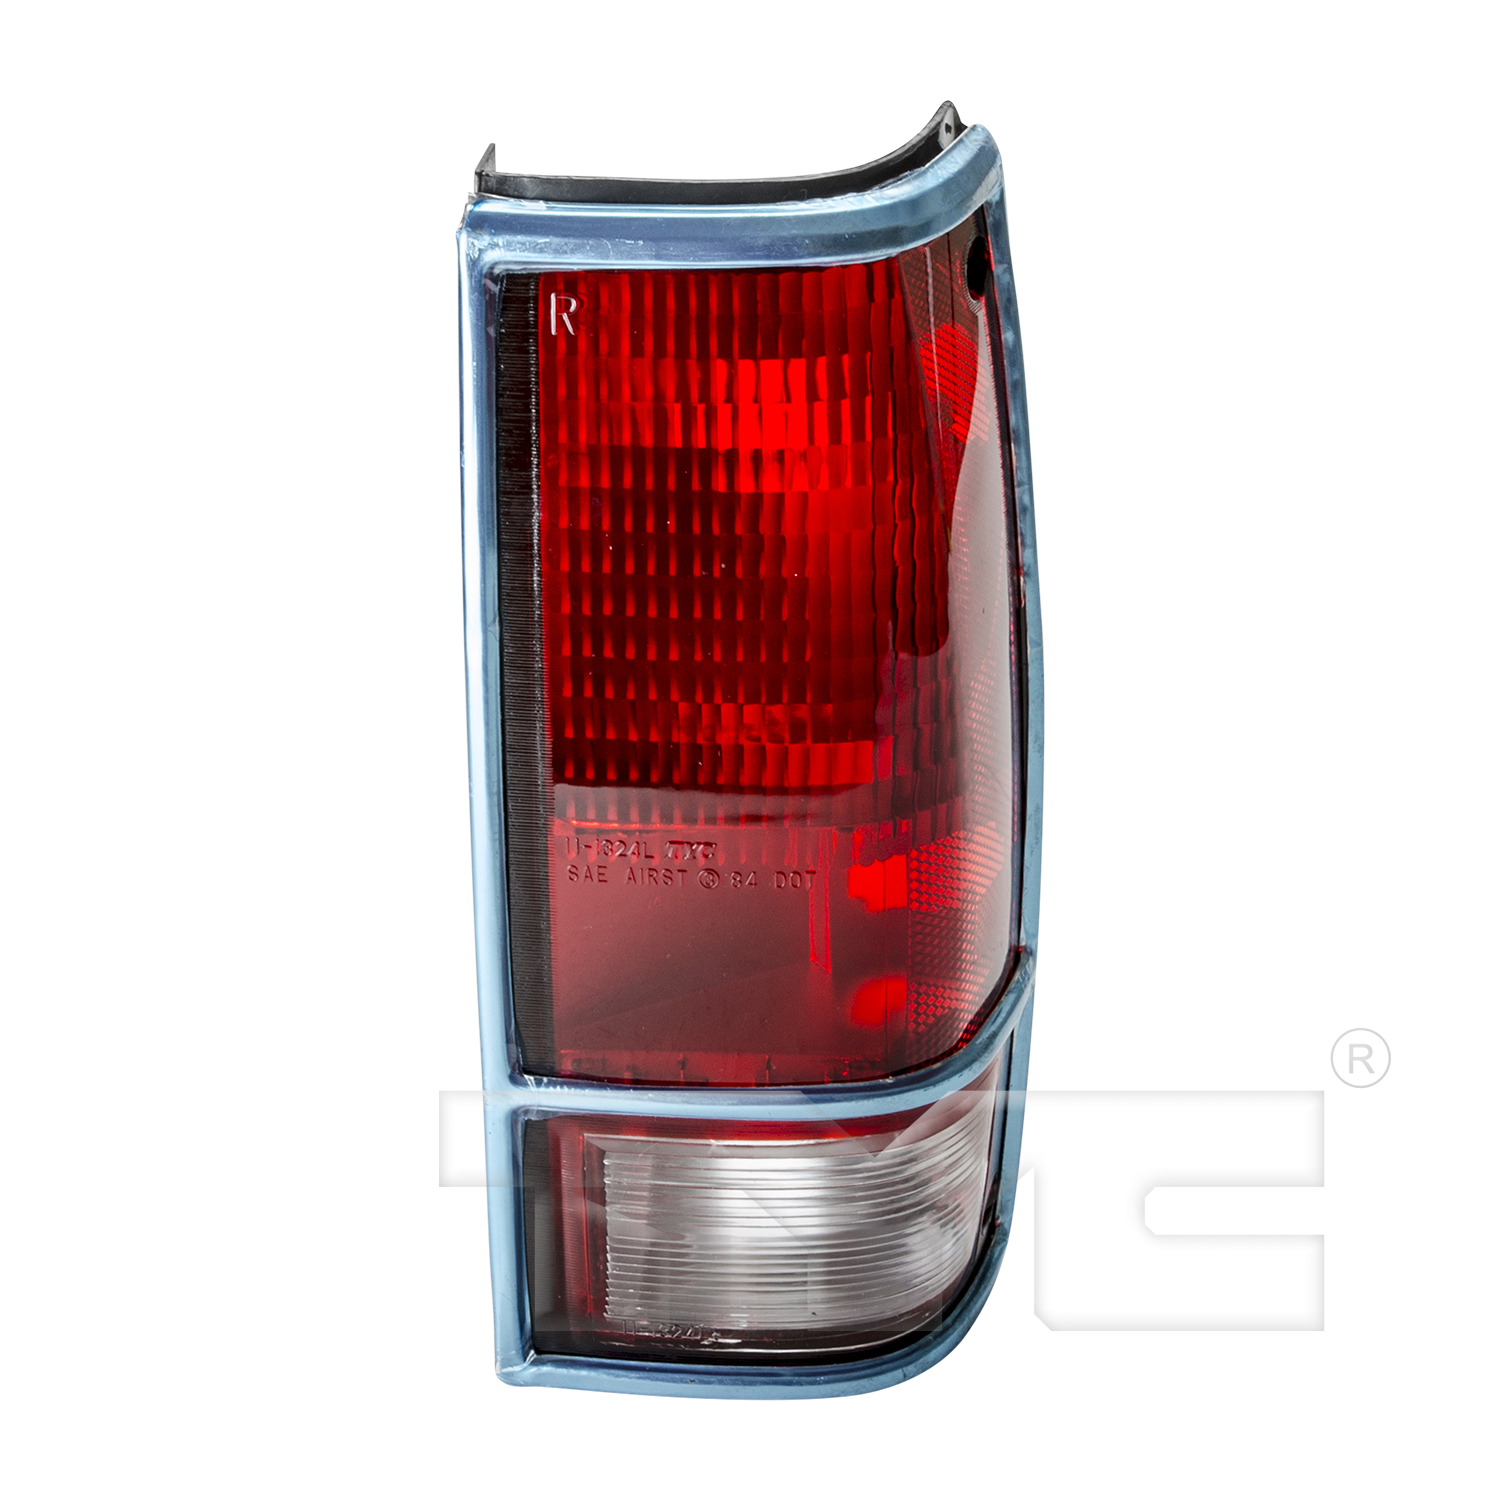 Aftermarket TAILLIGHTS for GMC - SONOMA, SONOMA,91-93,RT Taillamp assy